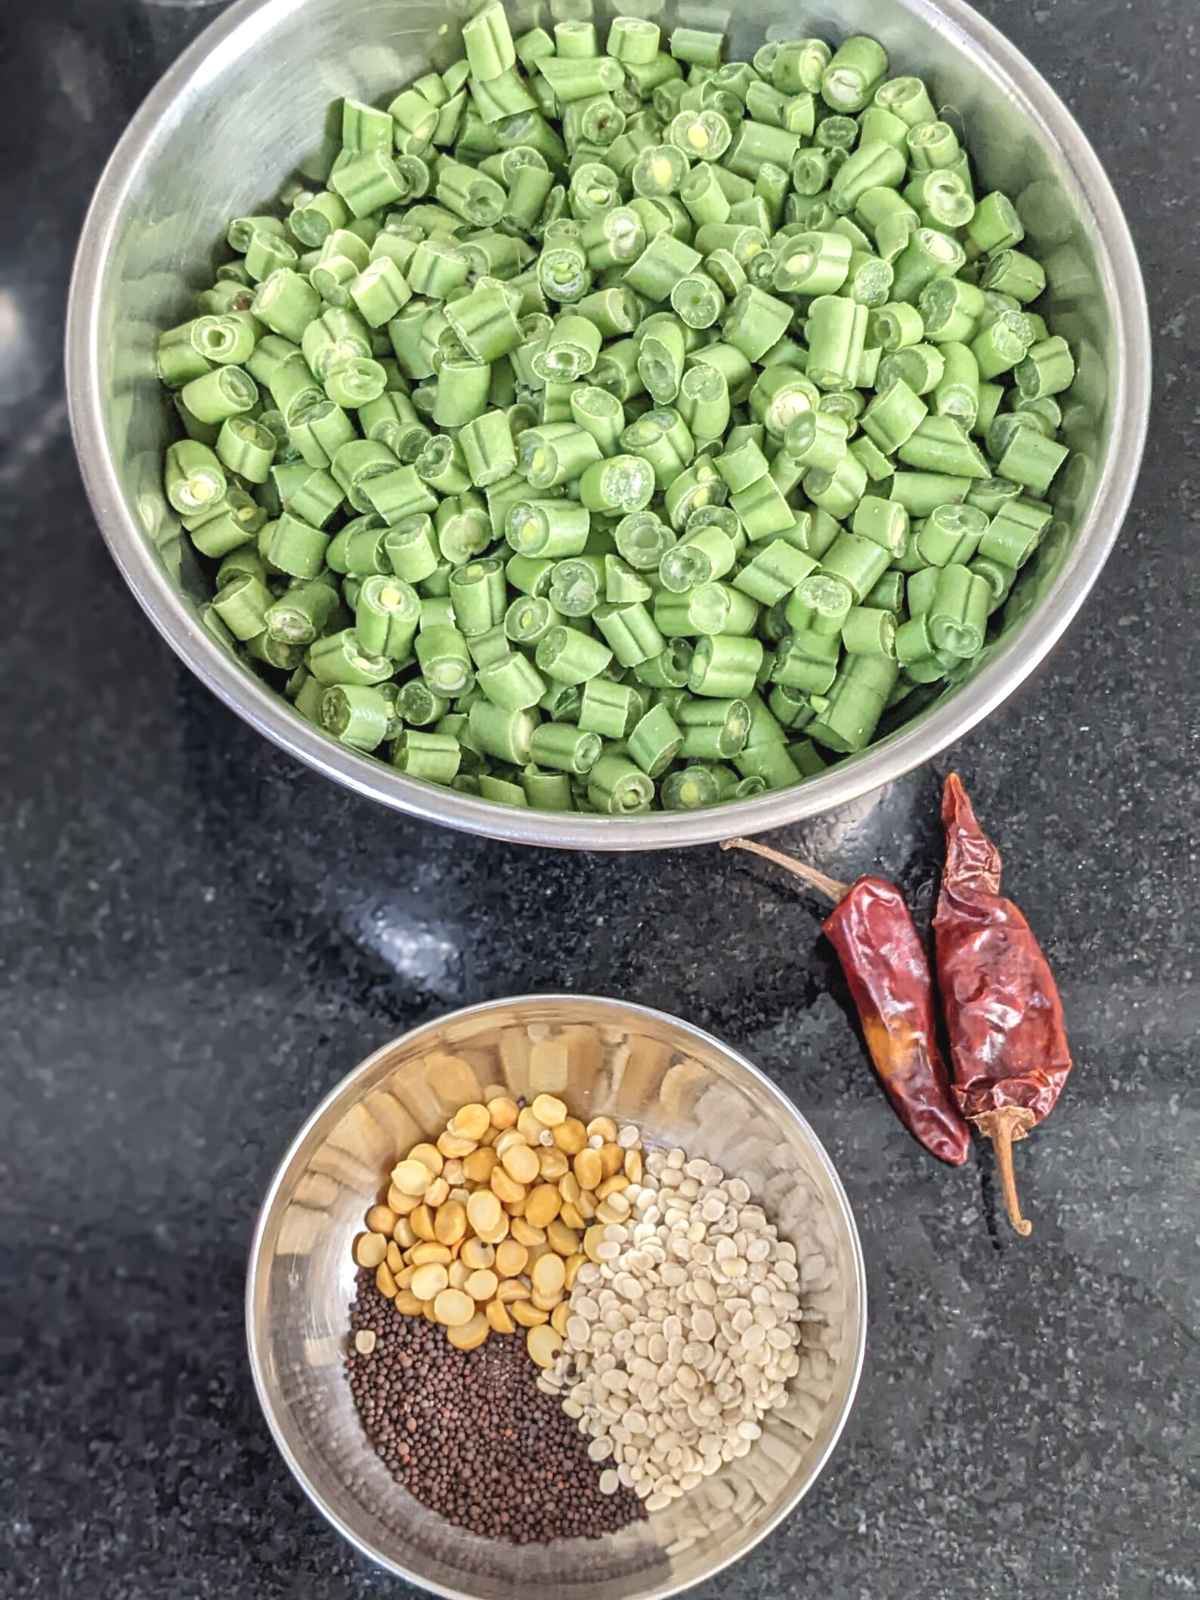 green beans cut into small pieces in a shallow bowl with lentils and mustard seeds in another bowl and 2 dry red chillis in the frame.